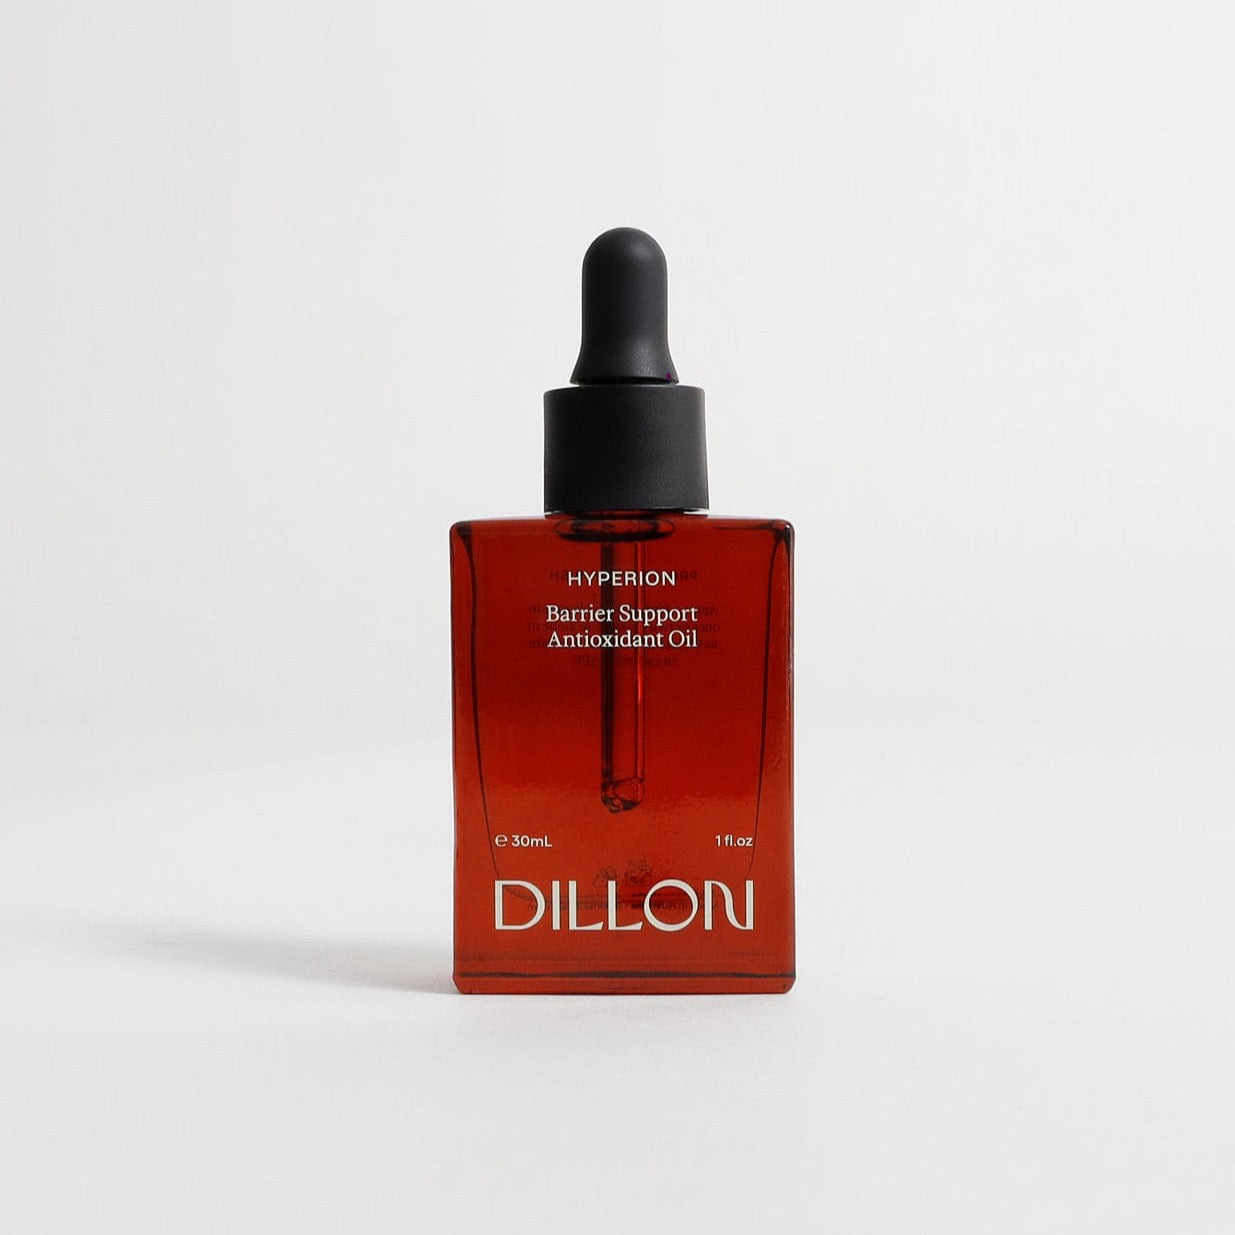 Hyperion Barrier Support Antioxidant Oil by DILLON